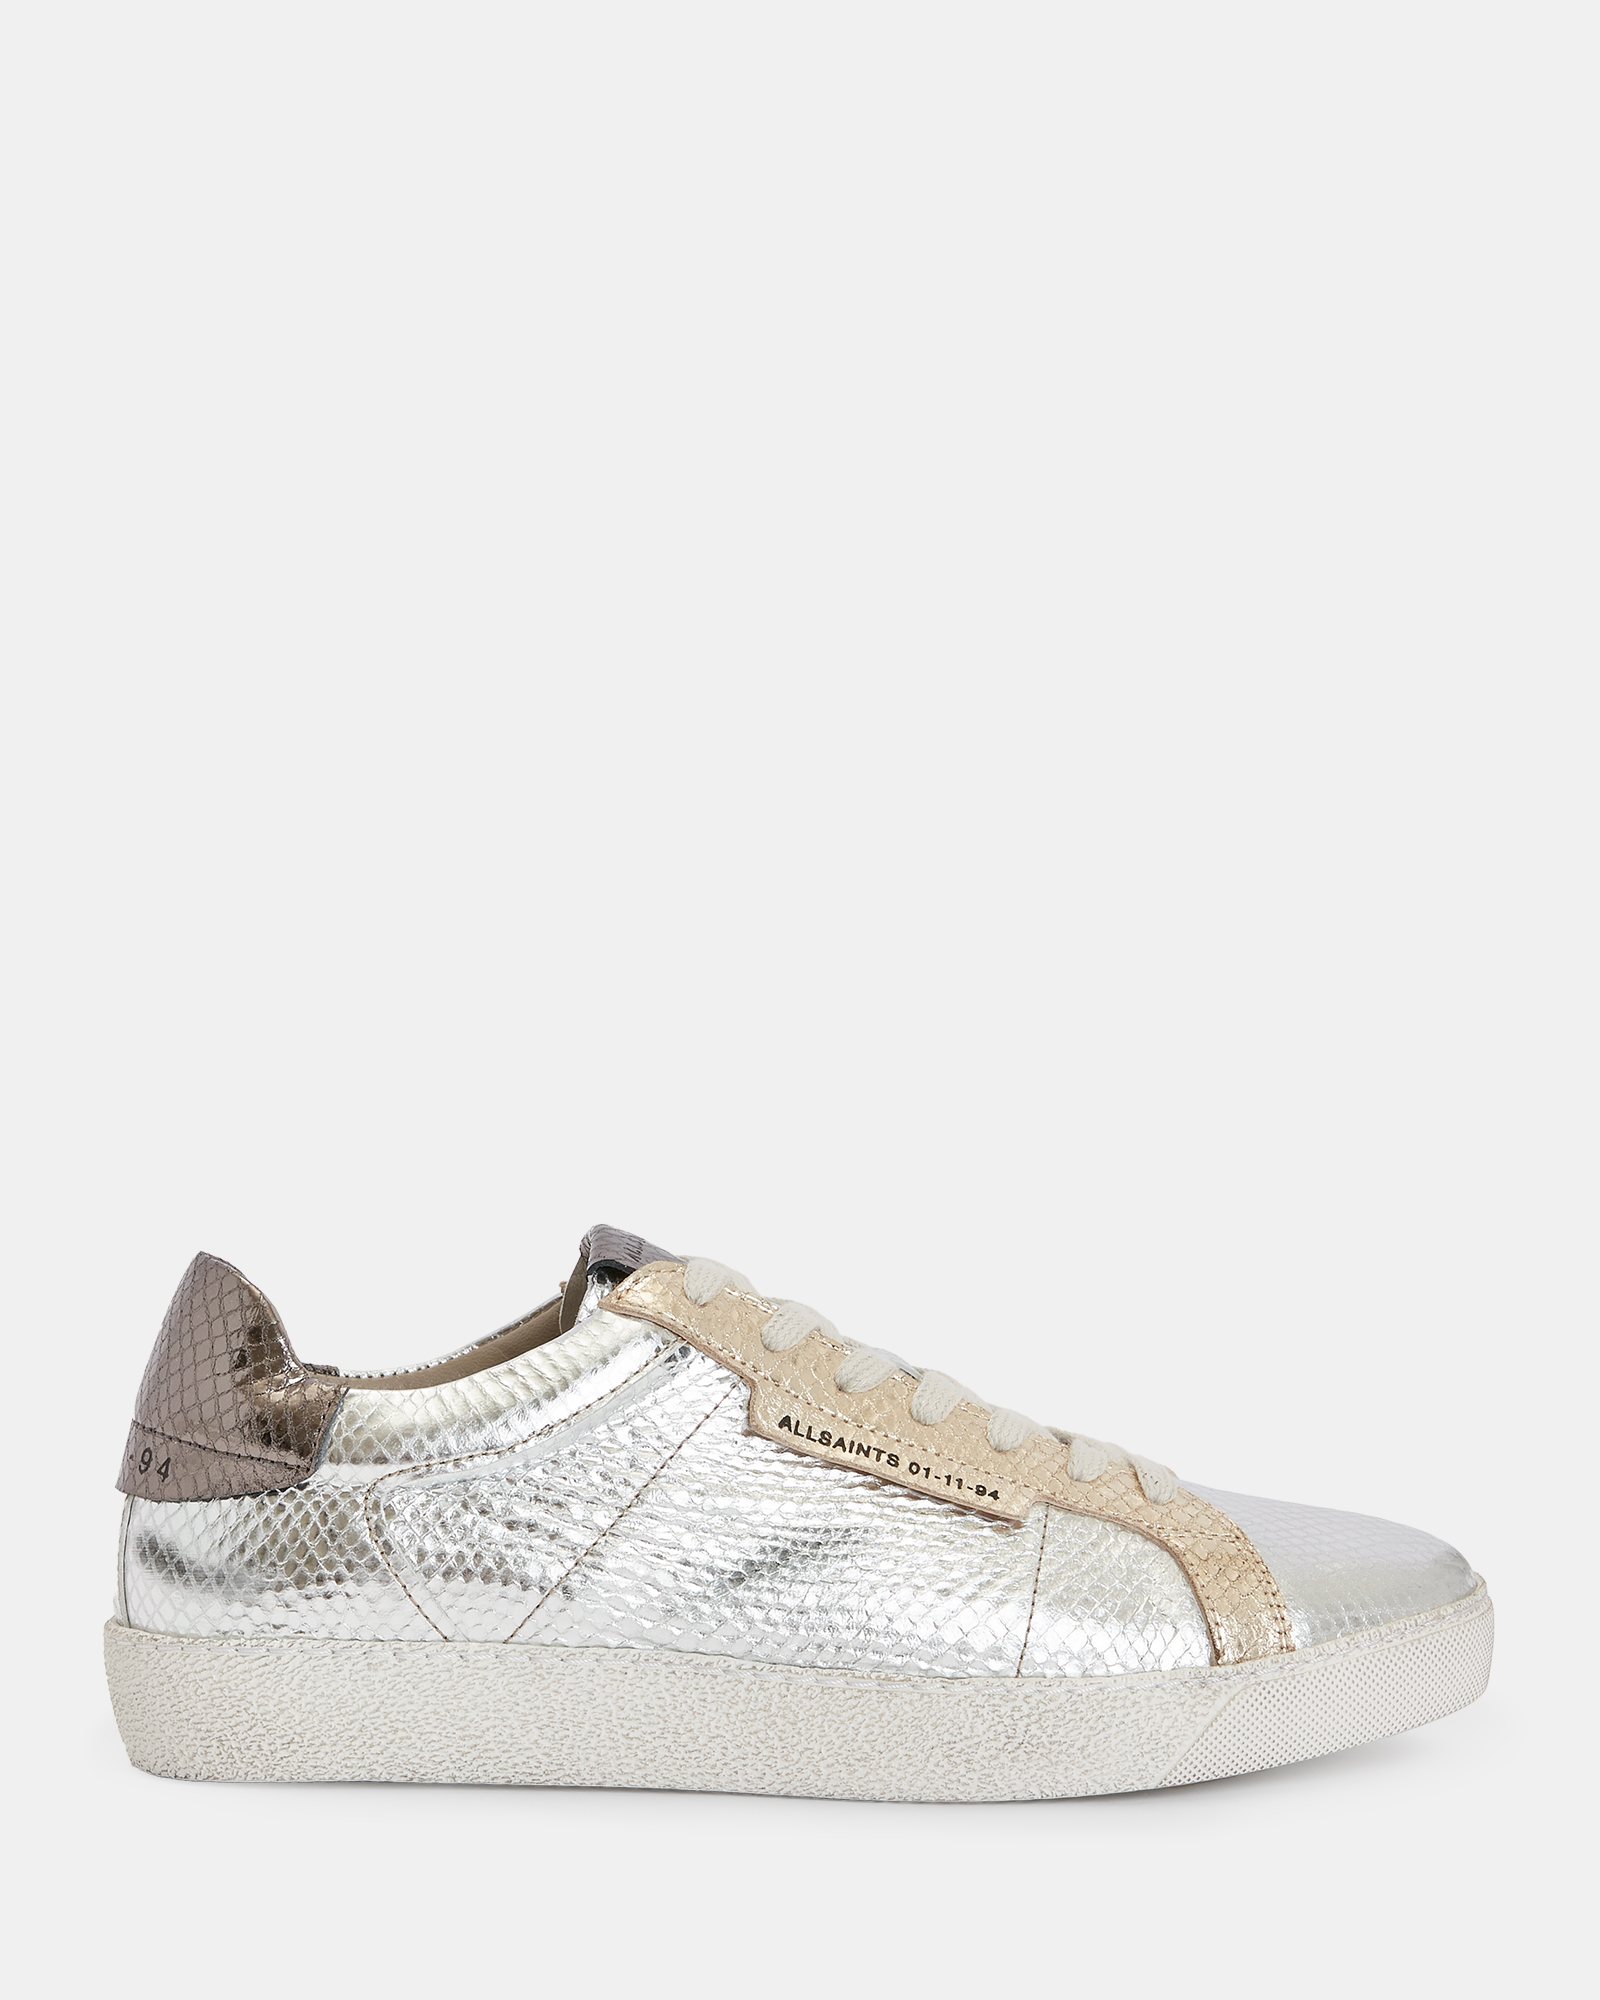 Sheer Metallic Leather Trainers Silver/Gold | ALLSAINTS